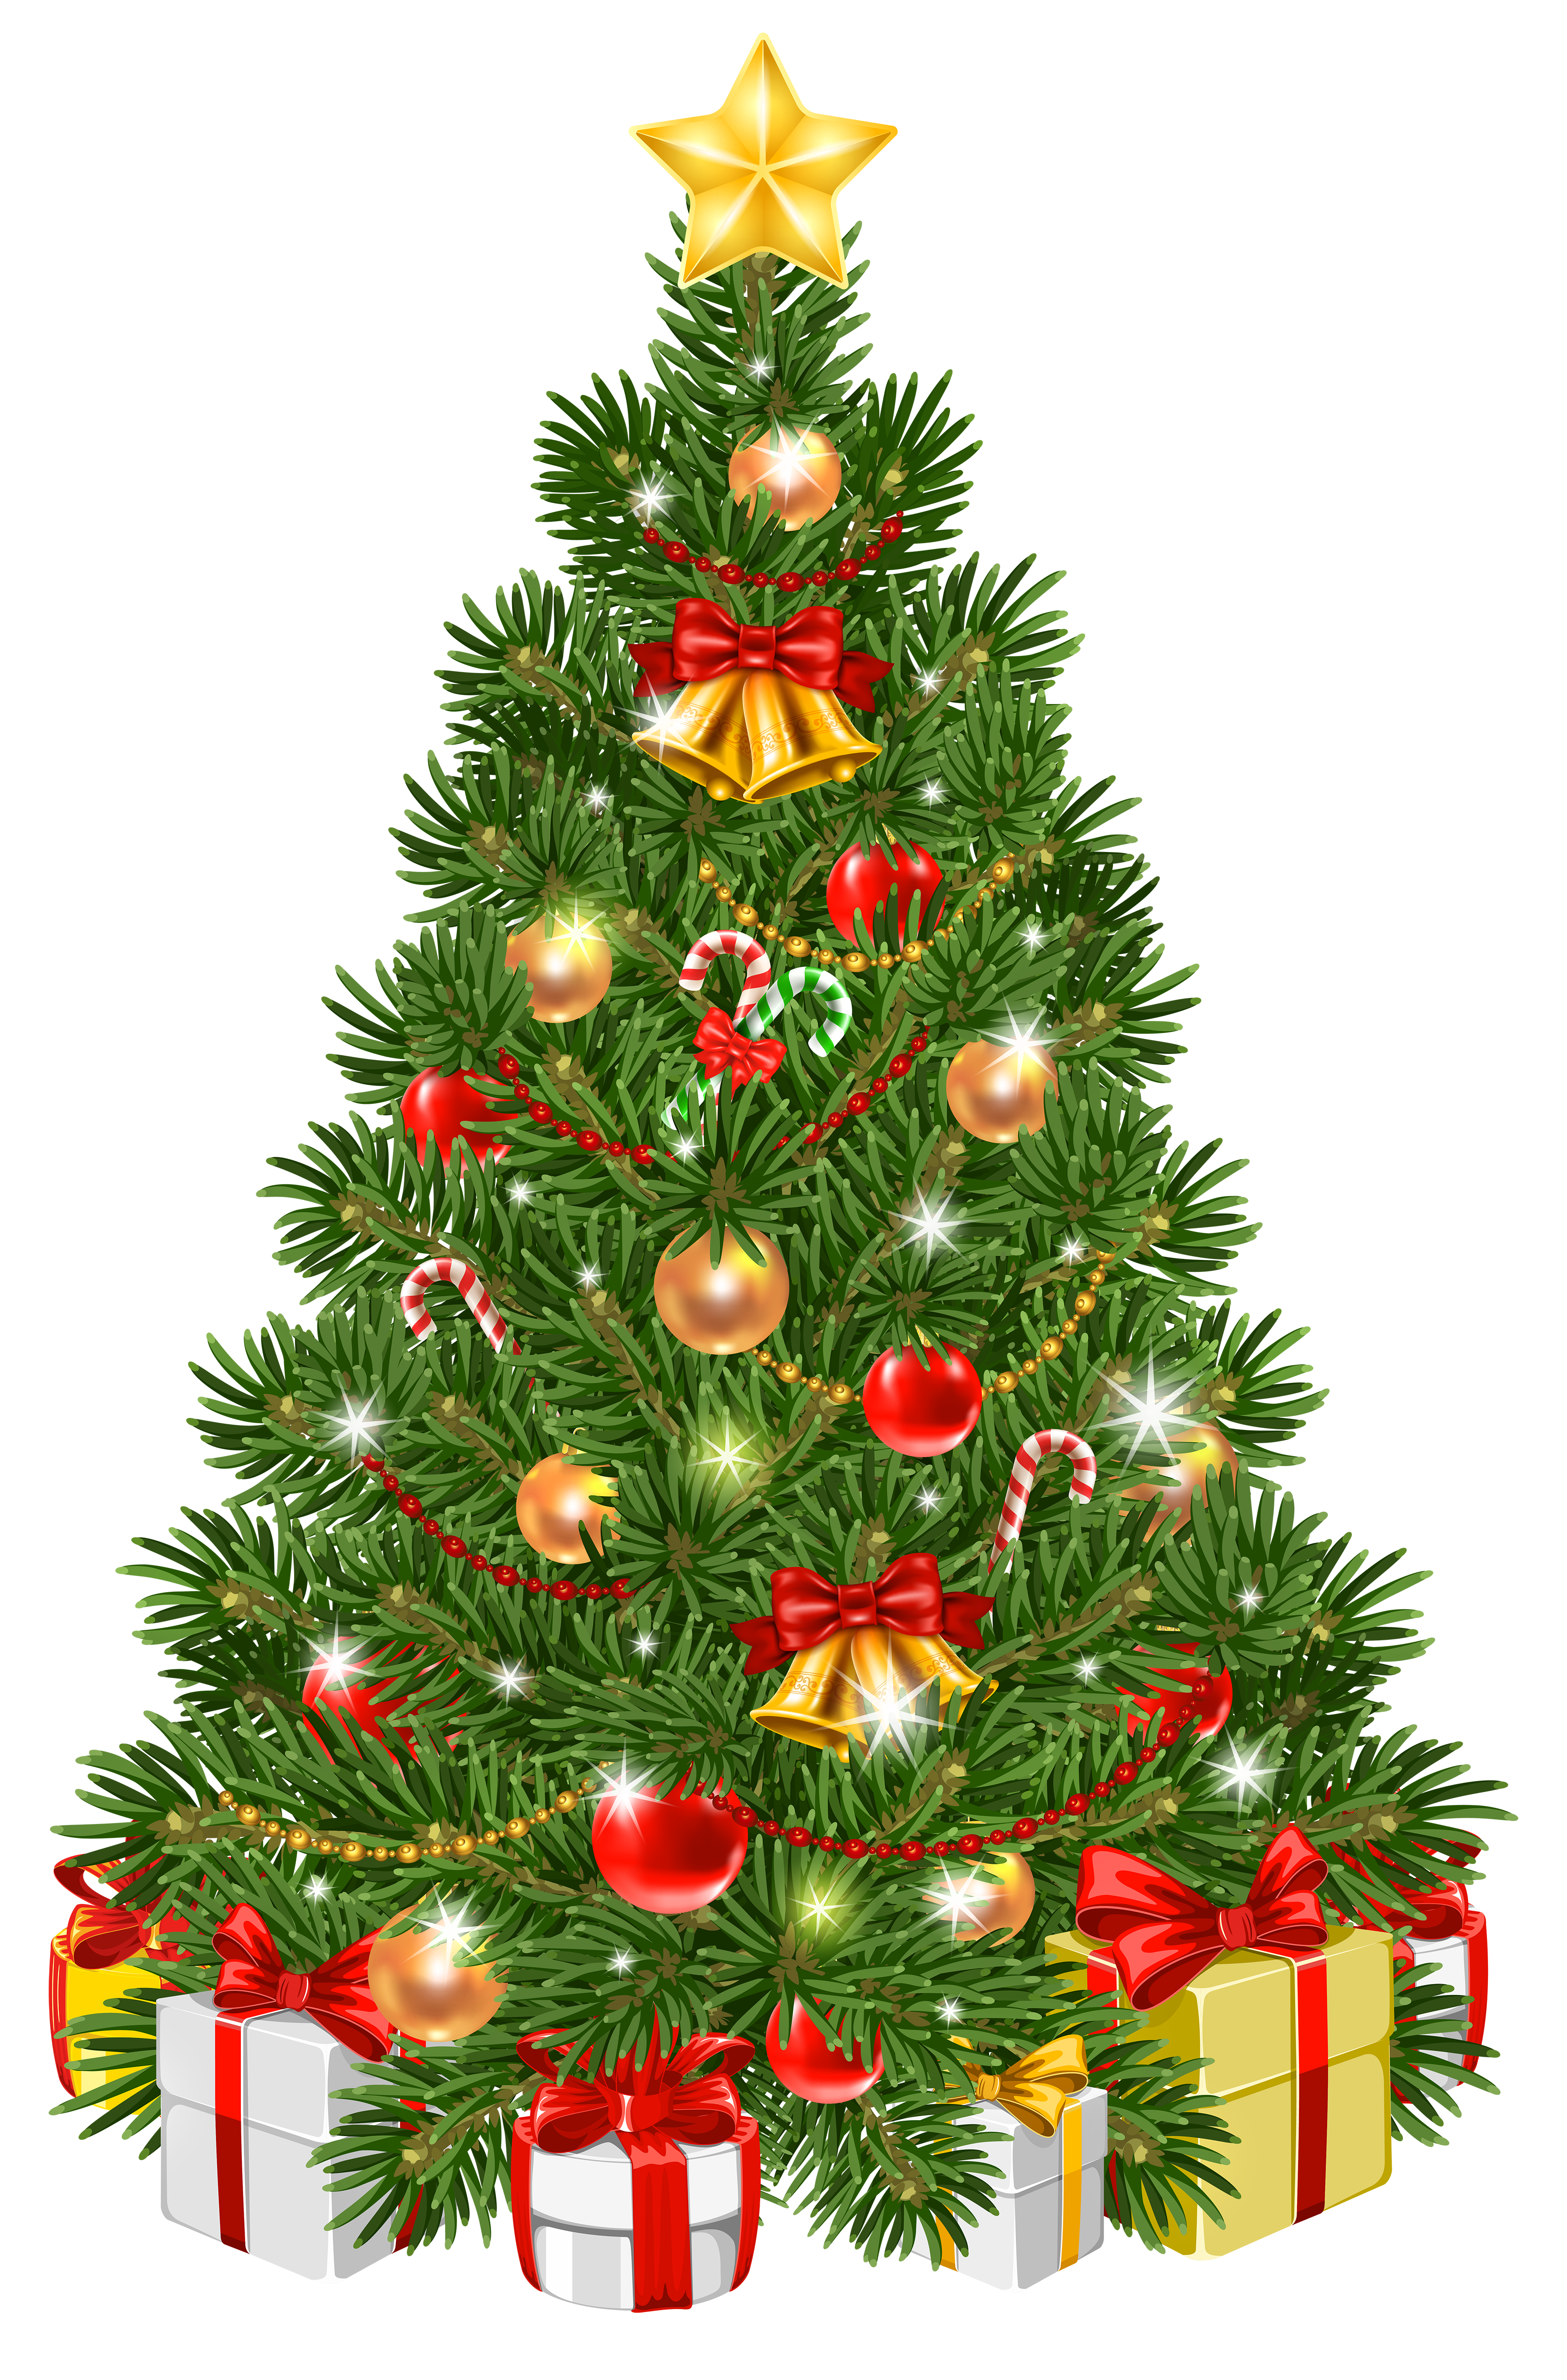 Decoration clipart christmas tree. Decorated transparent png clip